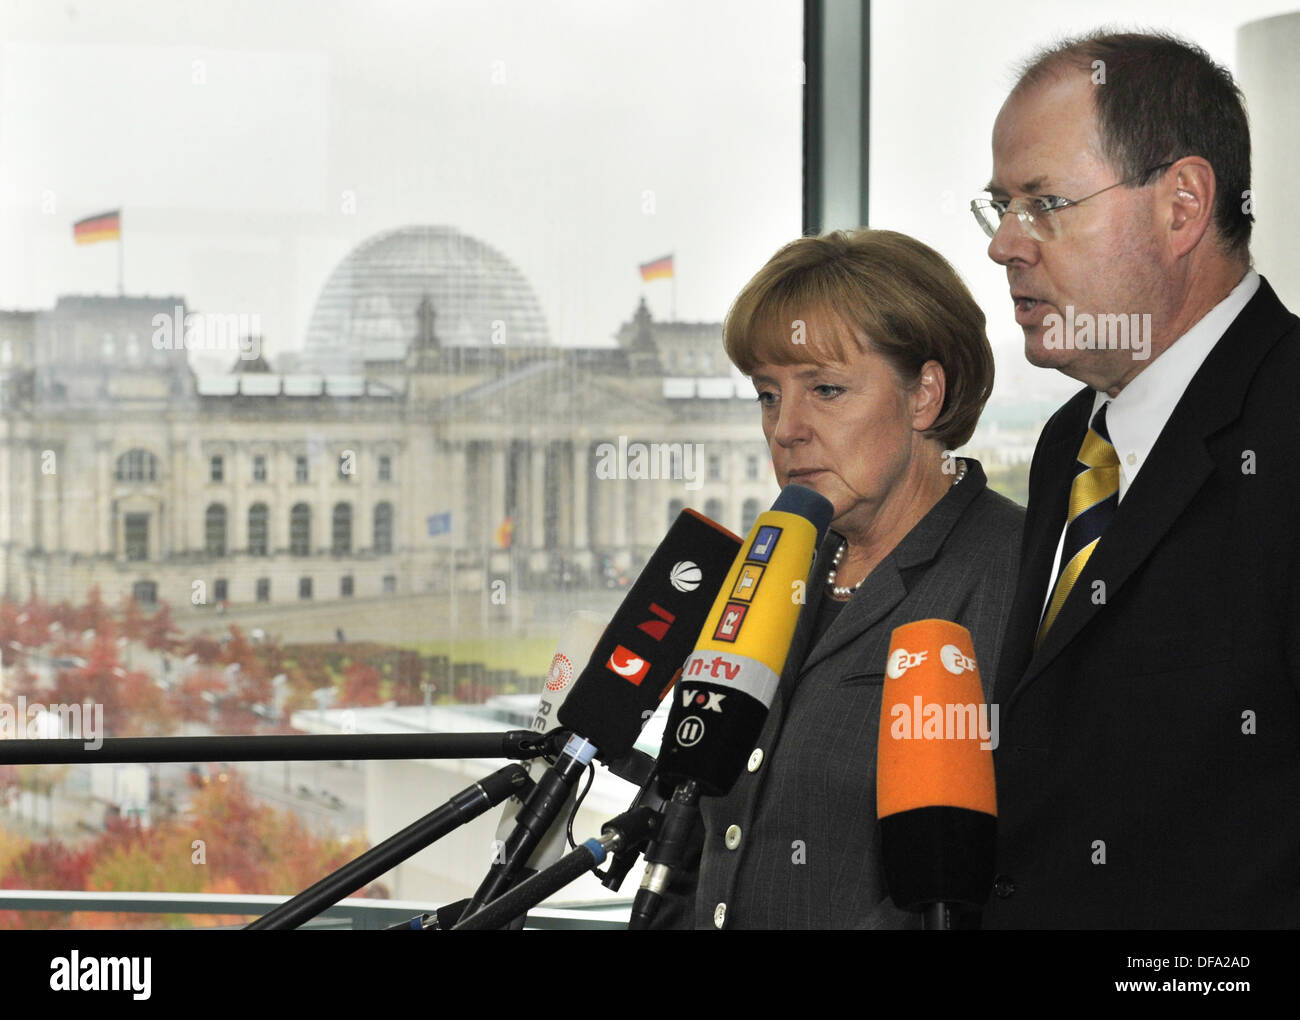 In the German Chancellery in Berlin on Sunday, 05 October 2008, the German Chancellor Angela Merkel (CDU) and the German minister of finance Peer Steinbrück (SPD) make a statement about the banking crisis of the Hypo Real Estate. Photo: Rainer Jensen dpa/lbn  +++(c) dpa - Report+++ Stock Photo